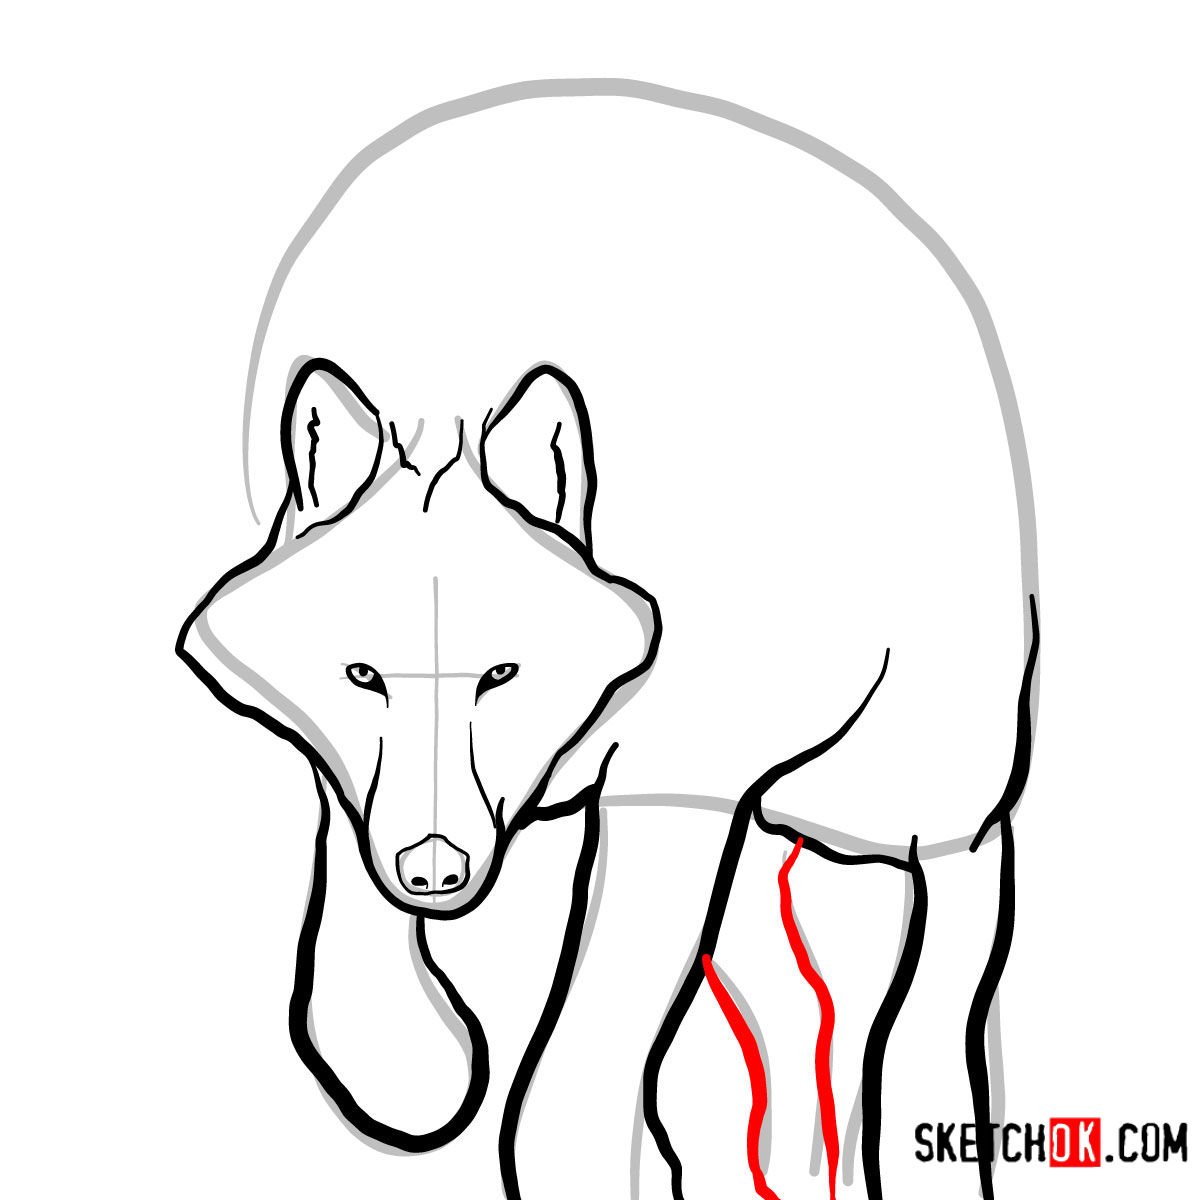 How to draw an Arctic wolf | Wild Animals - Sketchok easy drawing guides